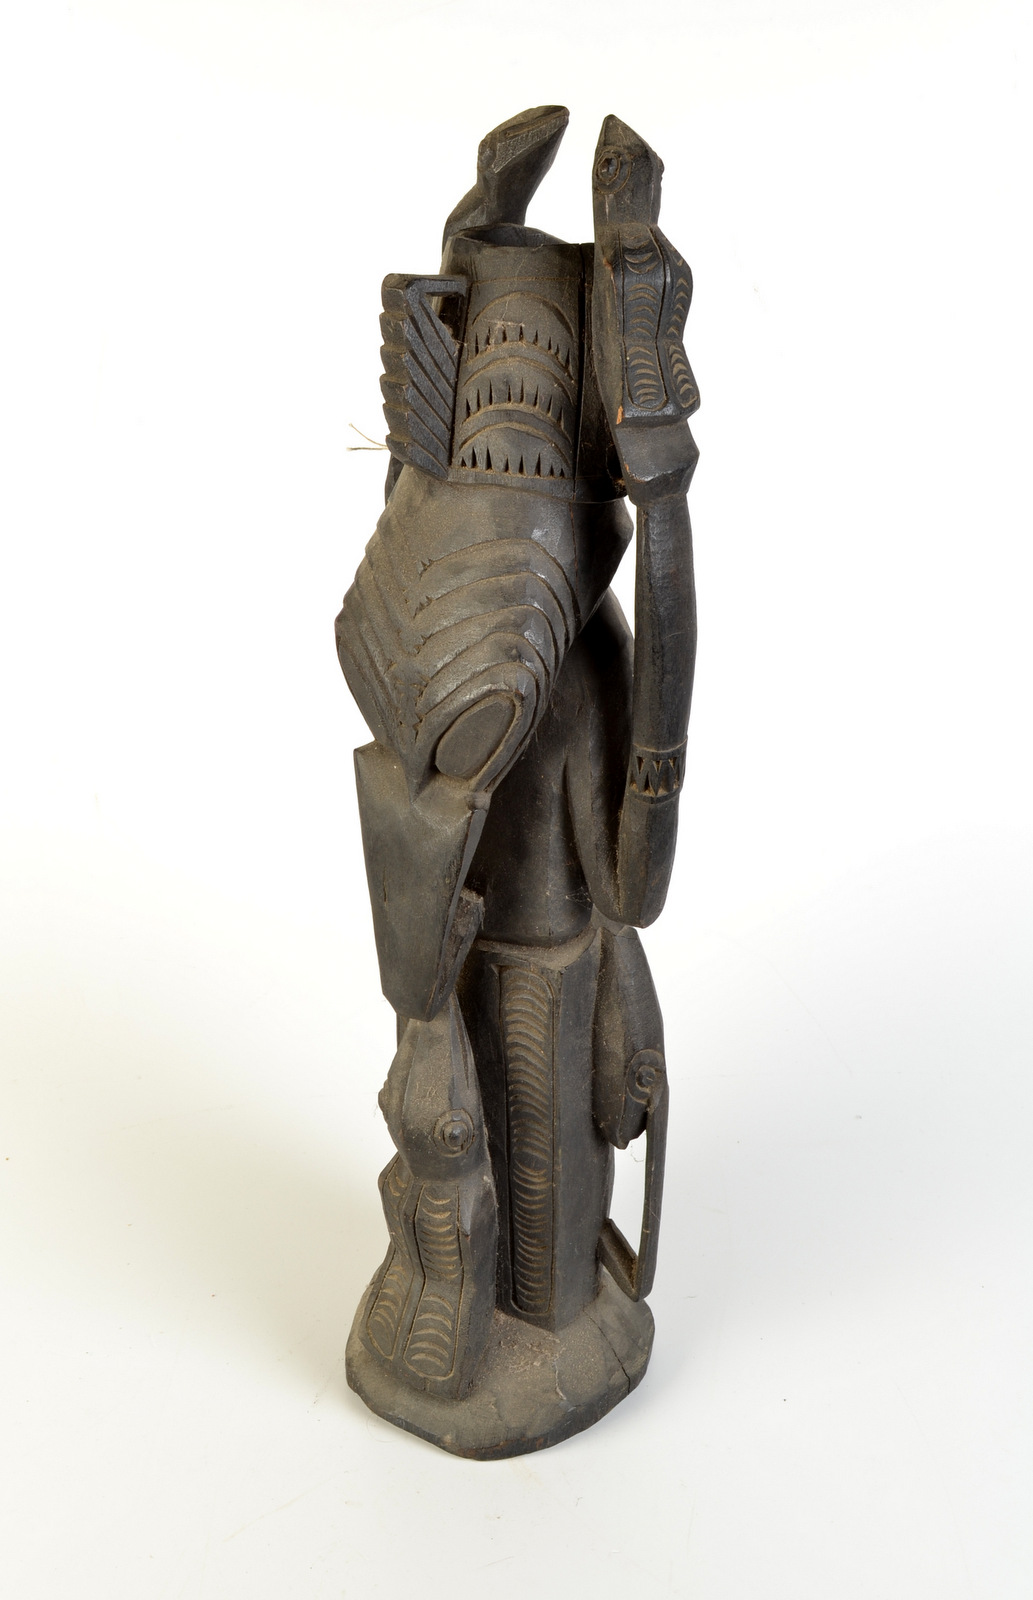 THE SHEILA ROSENBERG COLLECTION

A Papua New Guinea carved figure, height 58cm.